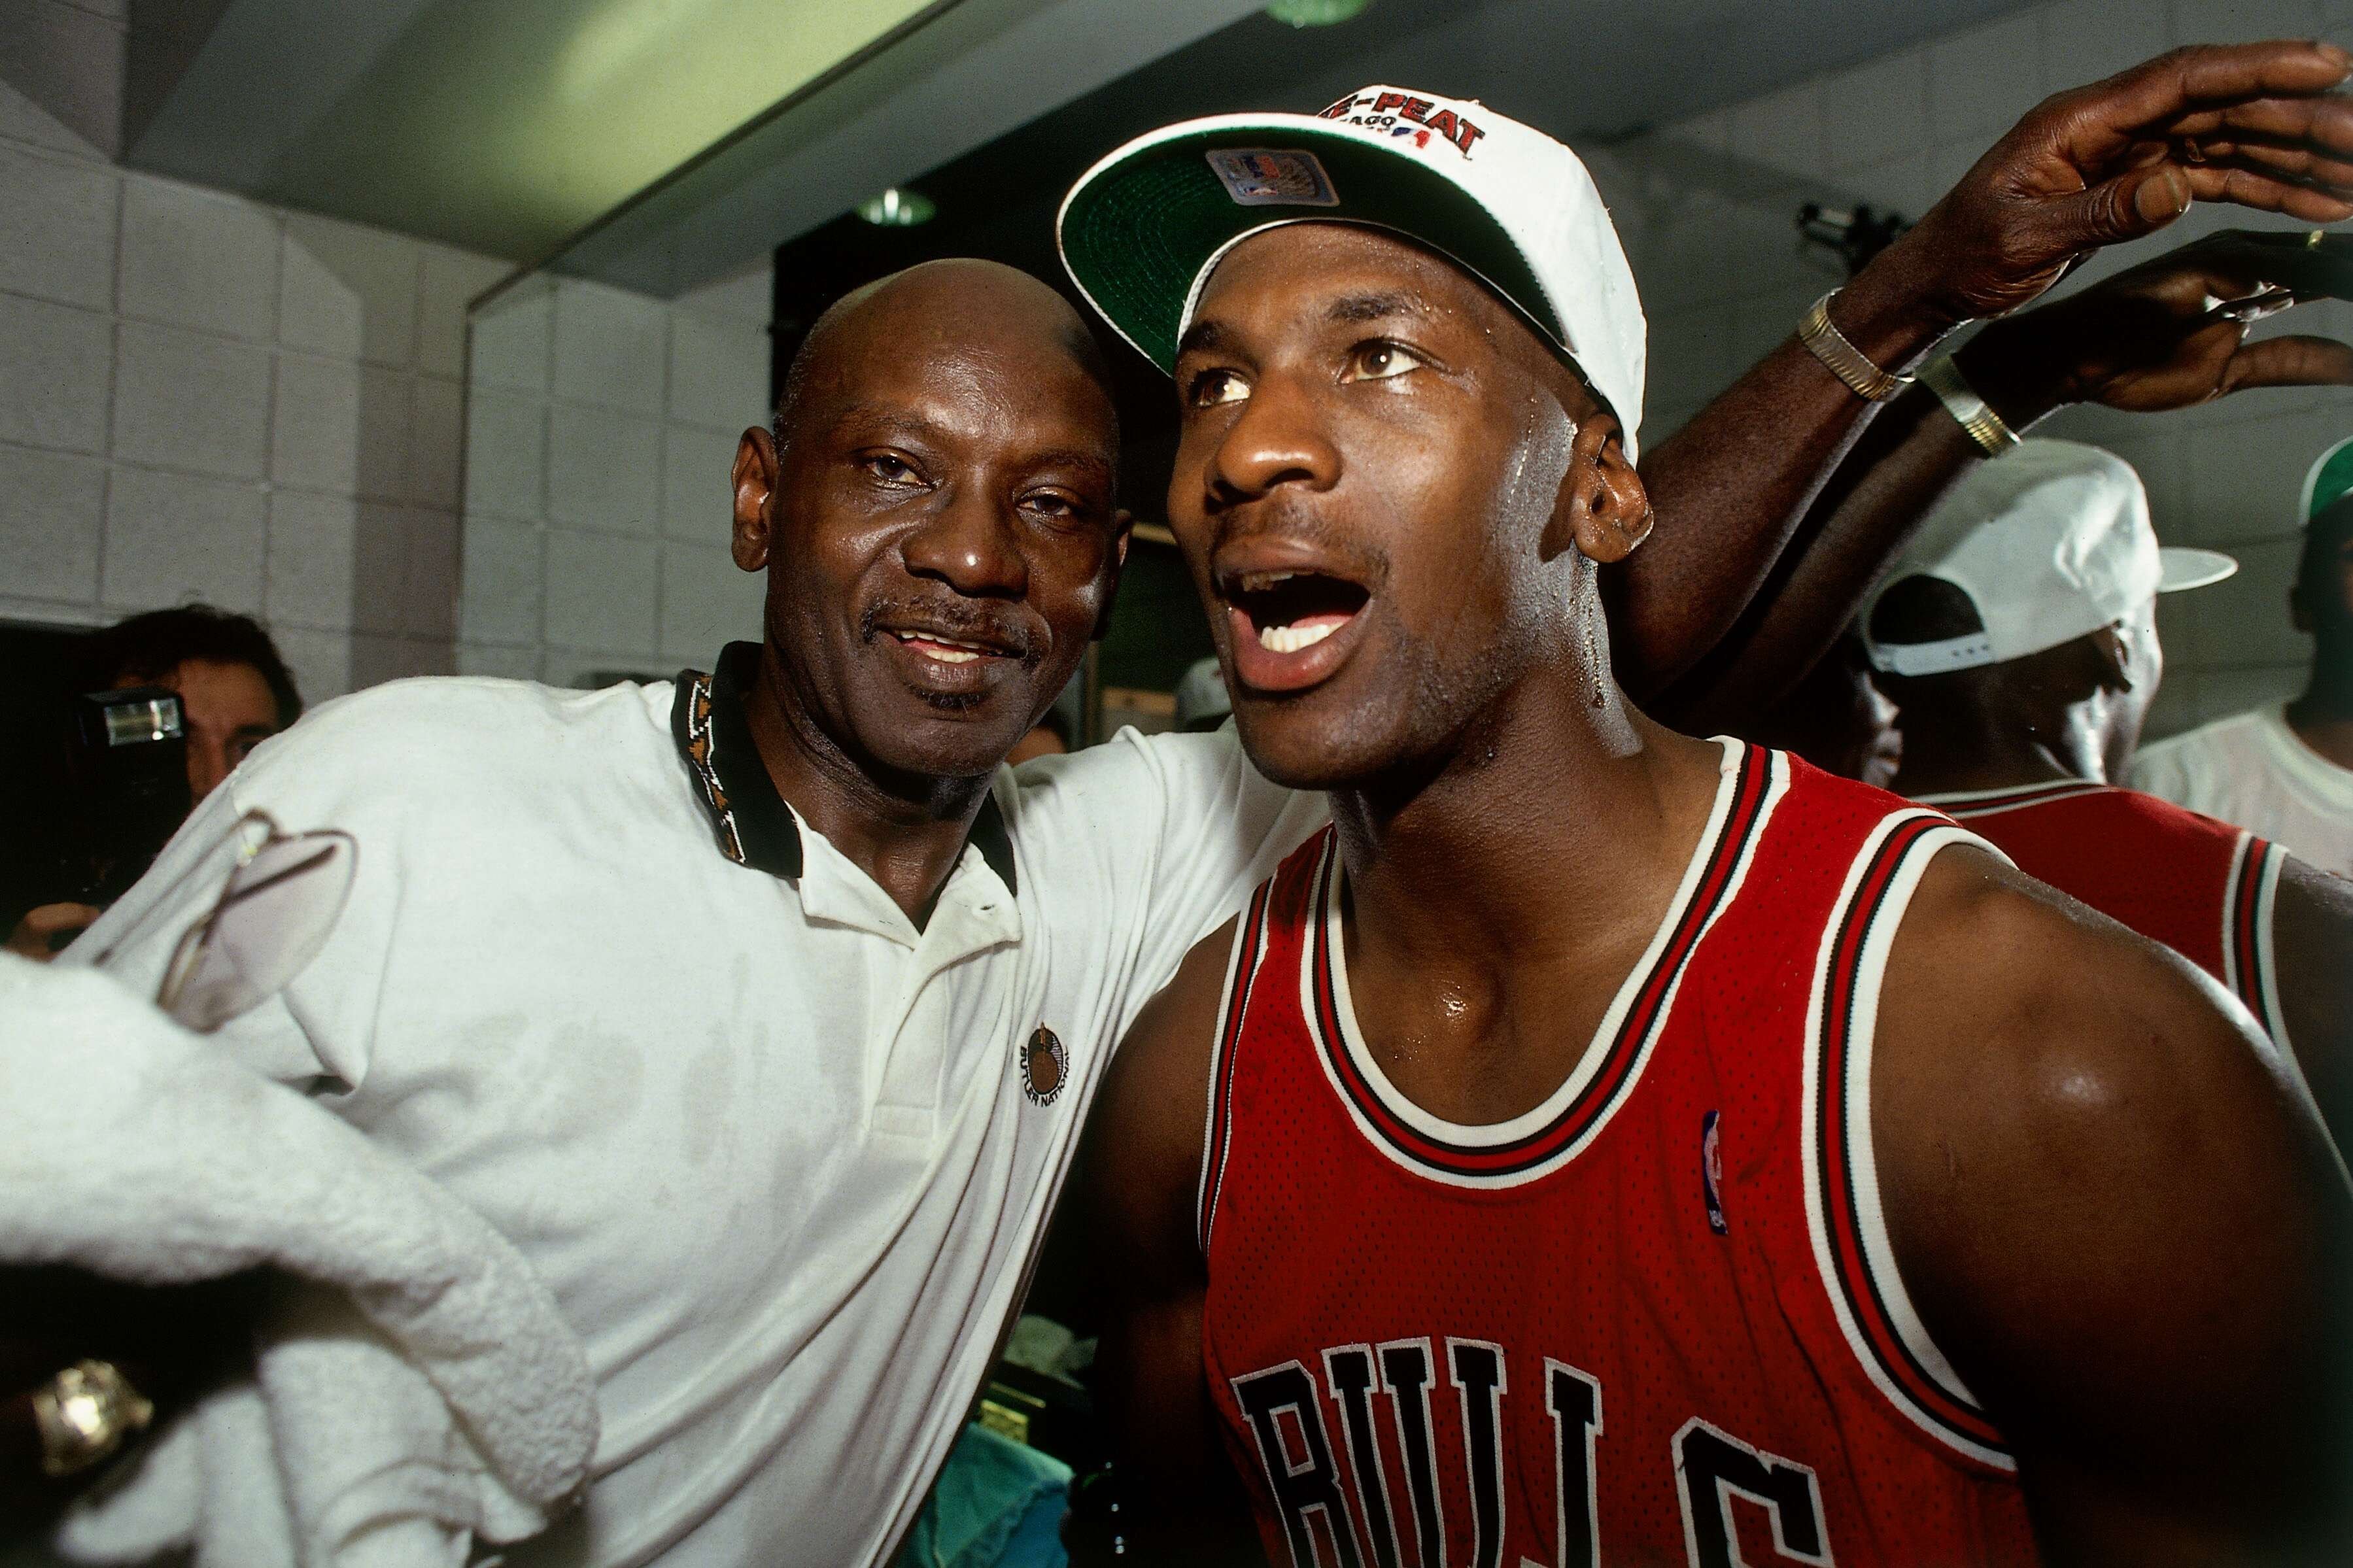 Michael Jordan and his father James Jordan in the Chicago Bulls locker room in 1991. | Source: Getty Images